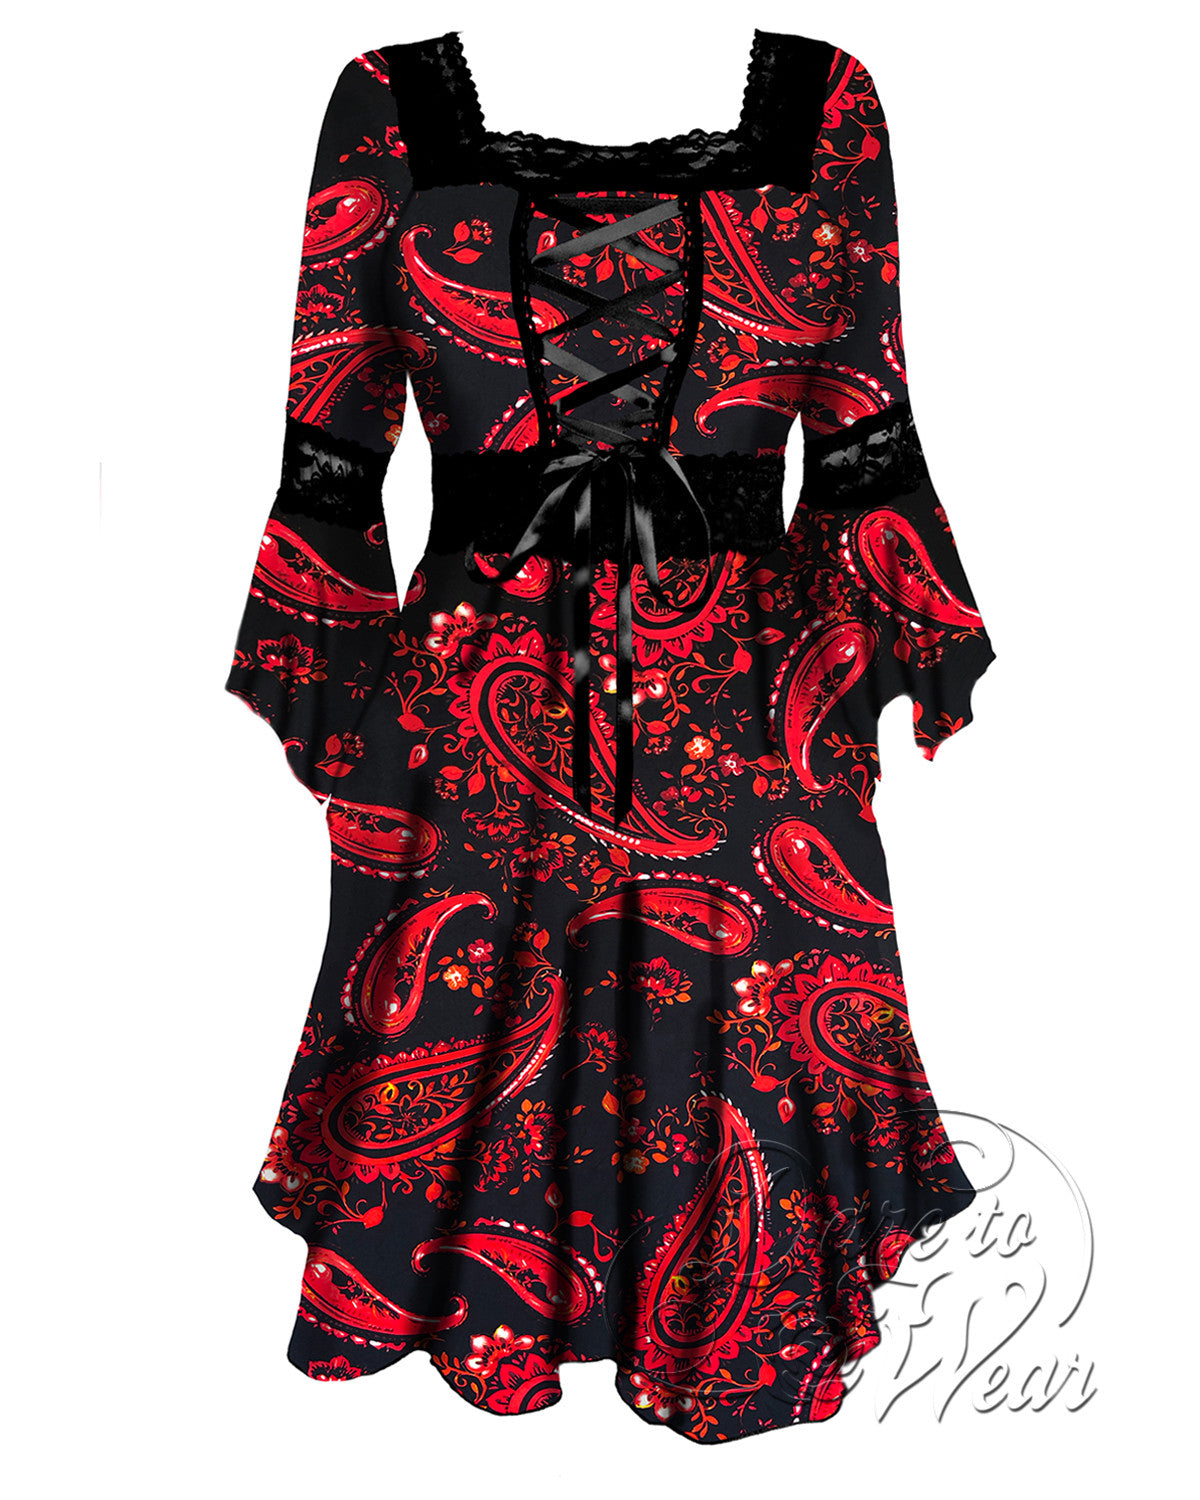 Renaissance Dress in Firefly  Paisley Fire Dragon Gothic Corset Gown -  Dare Fashion